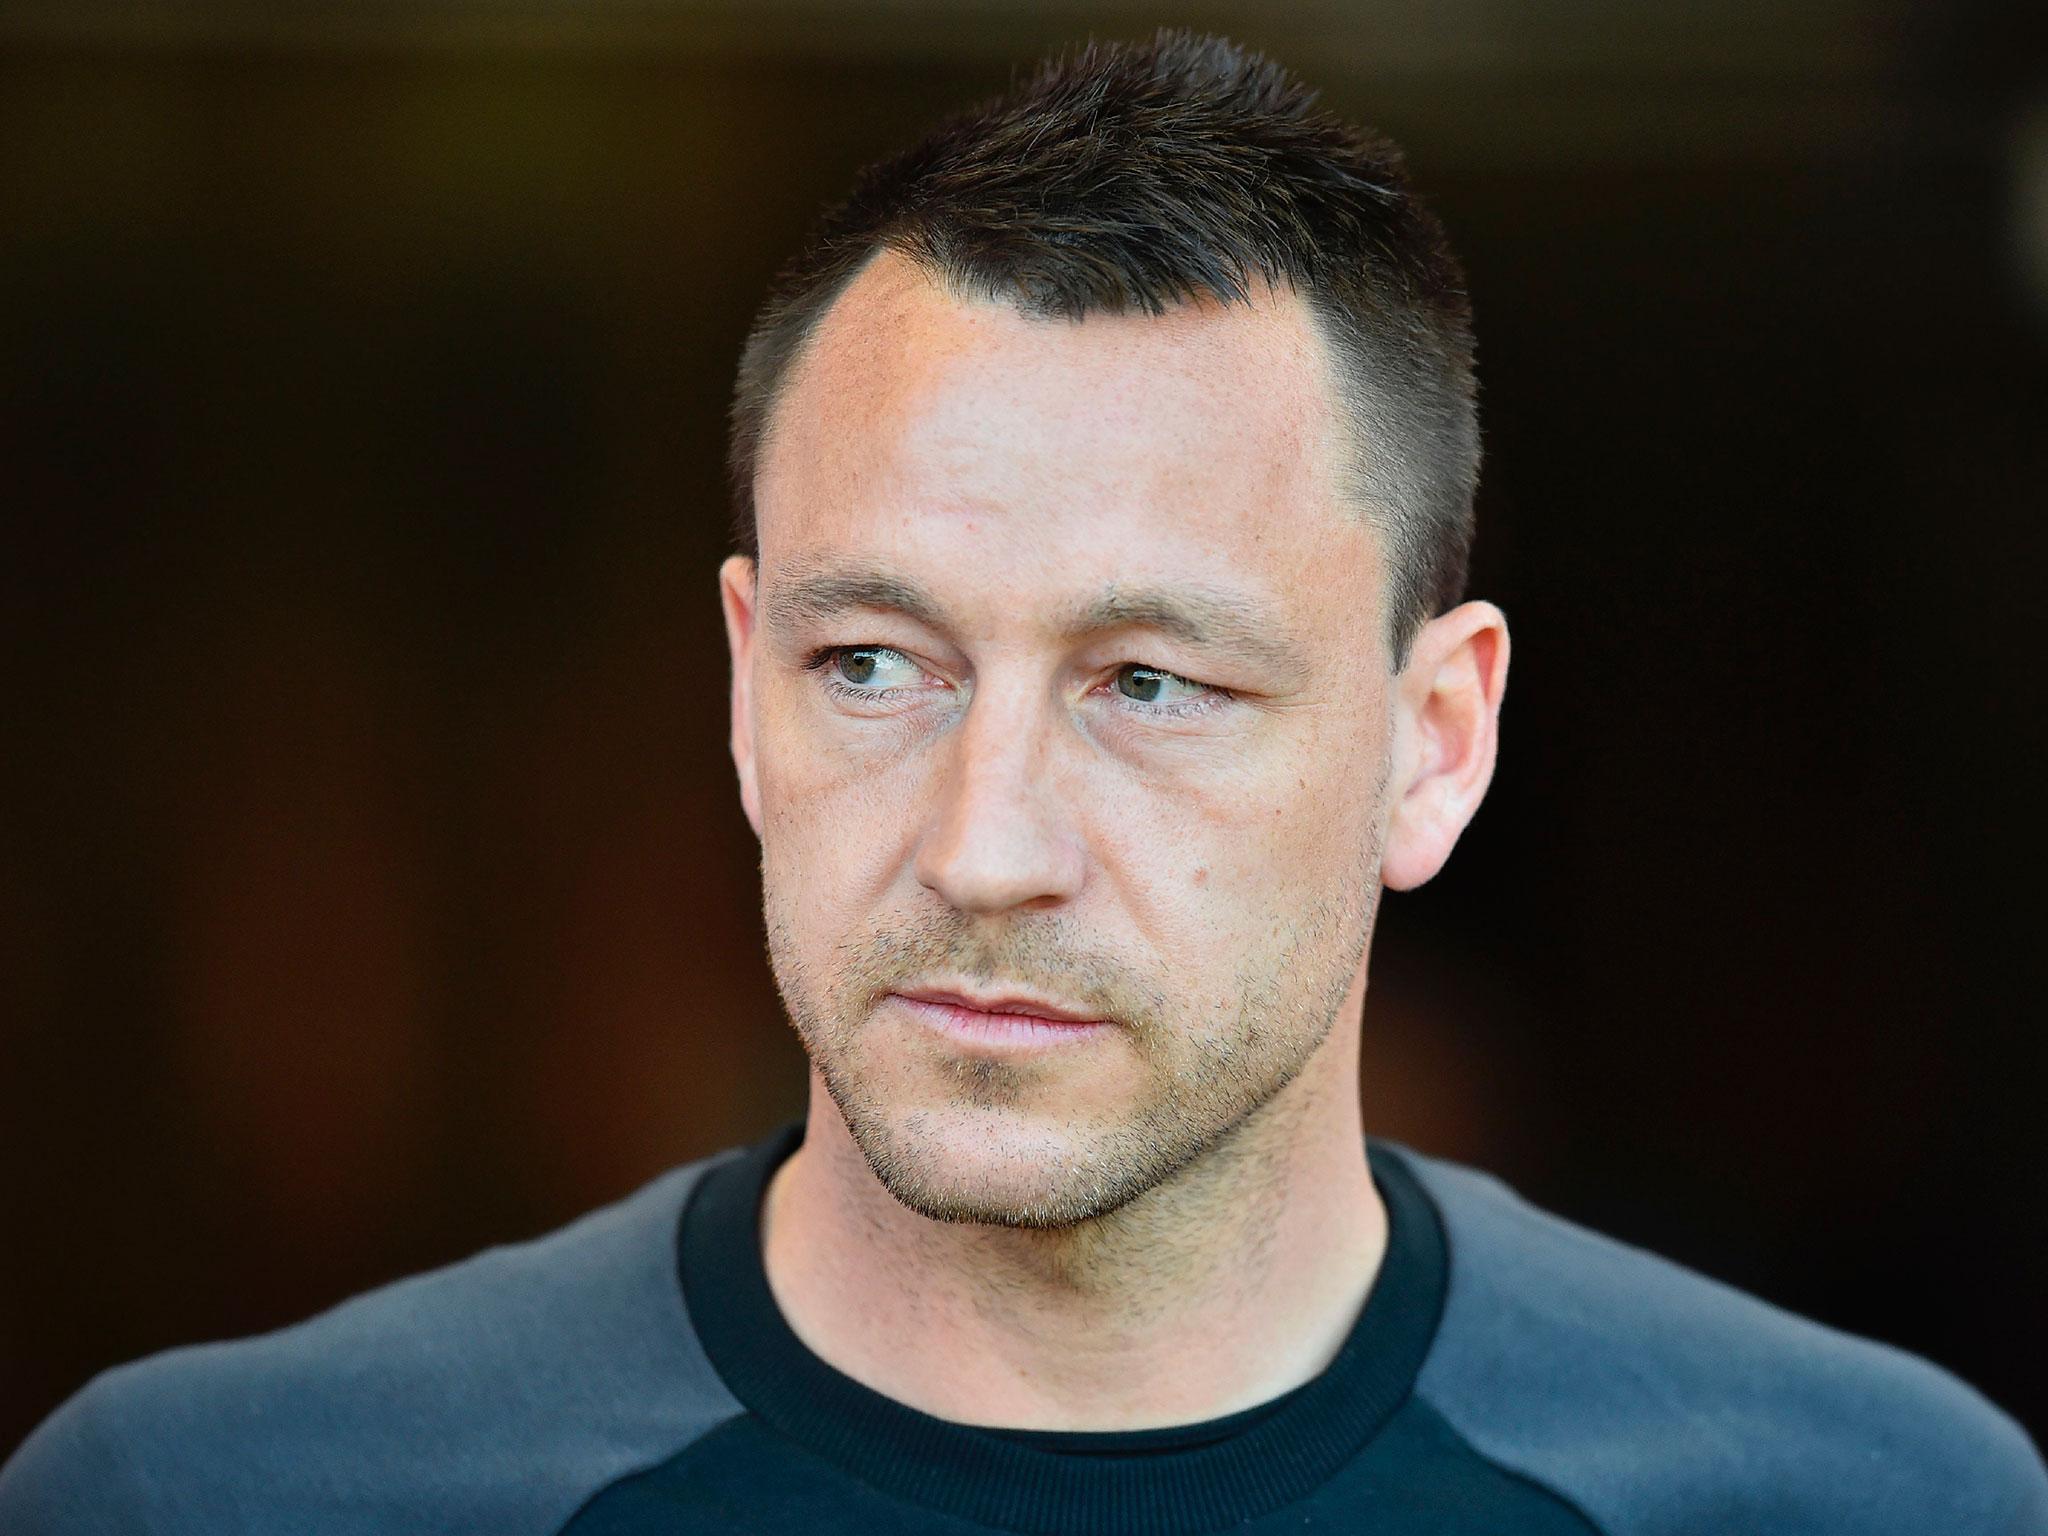 John Terry will join another club when he leaves Chelsea in the summer